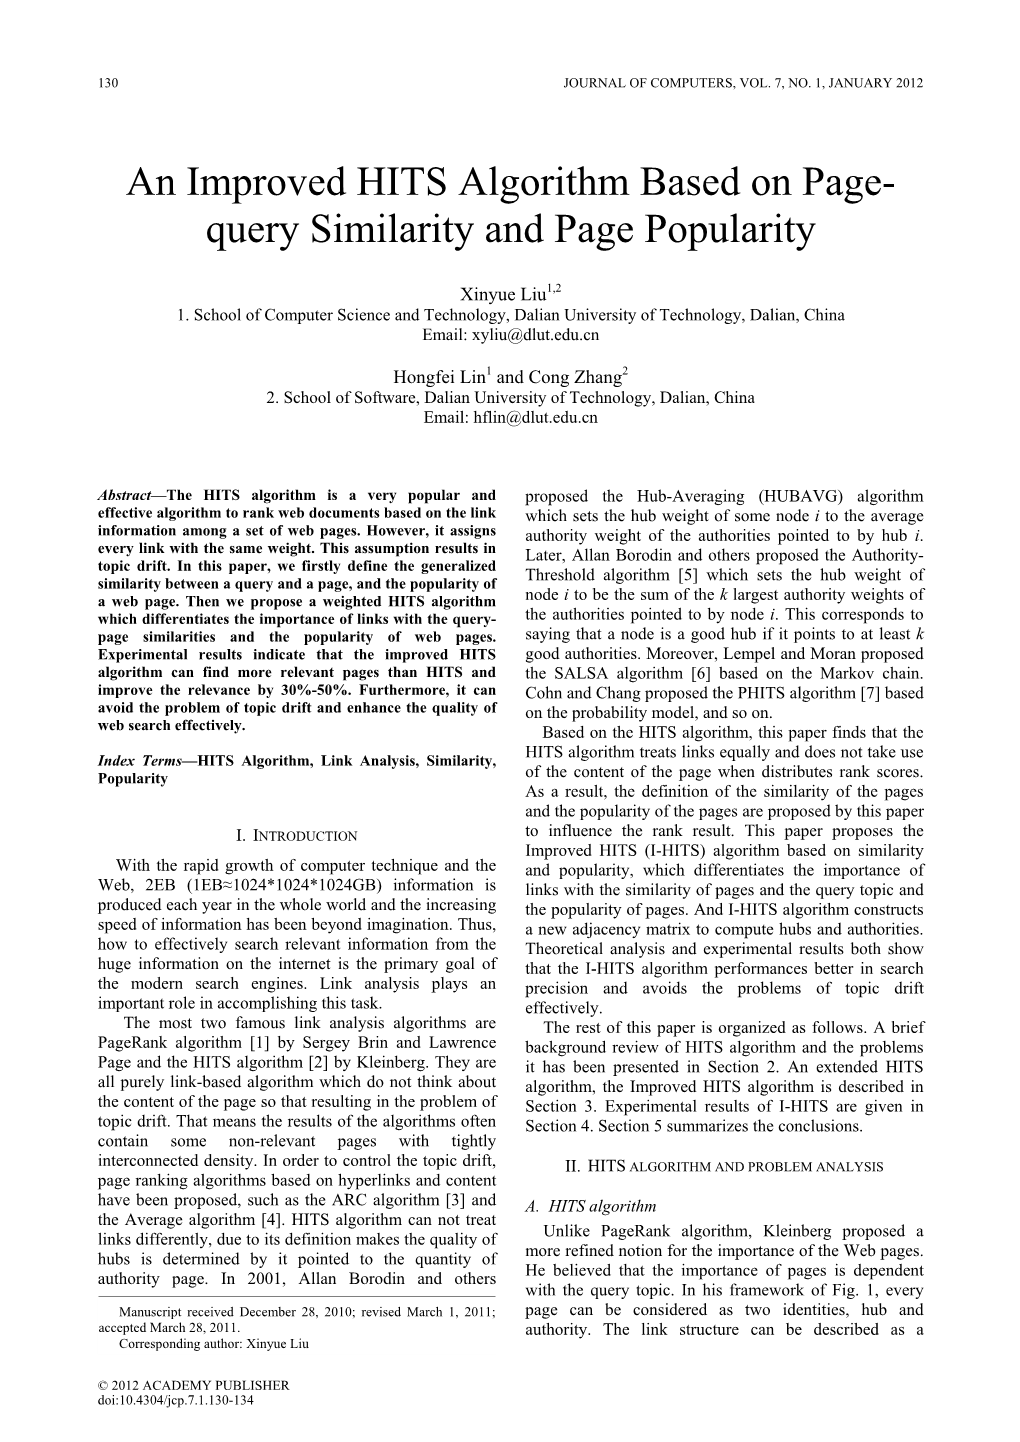 An Improved HITS Algorithm Based on Page- Query Similarity and Page Popularity